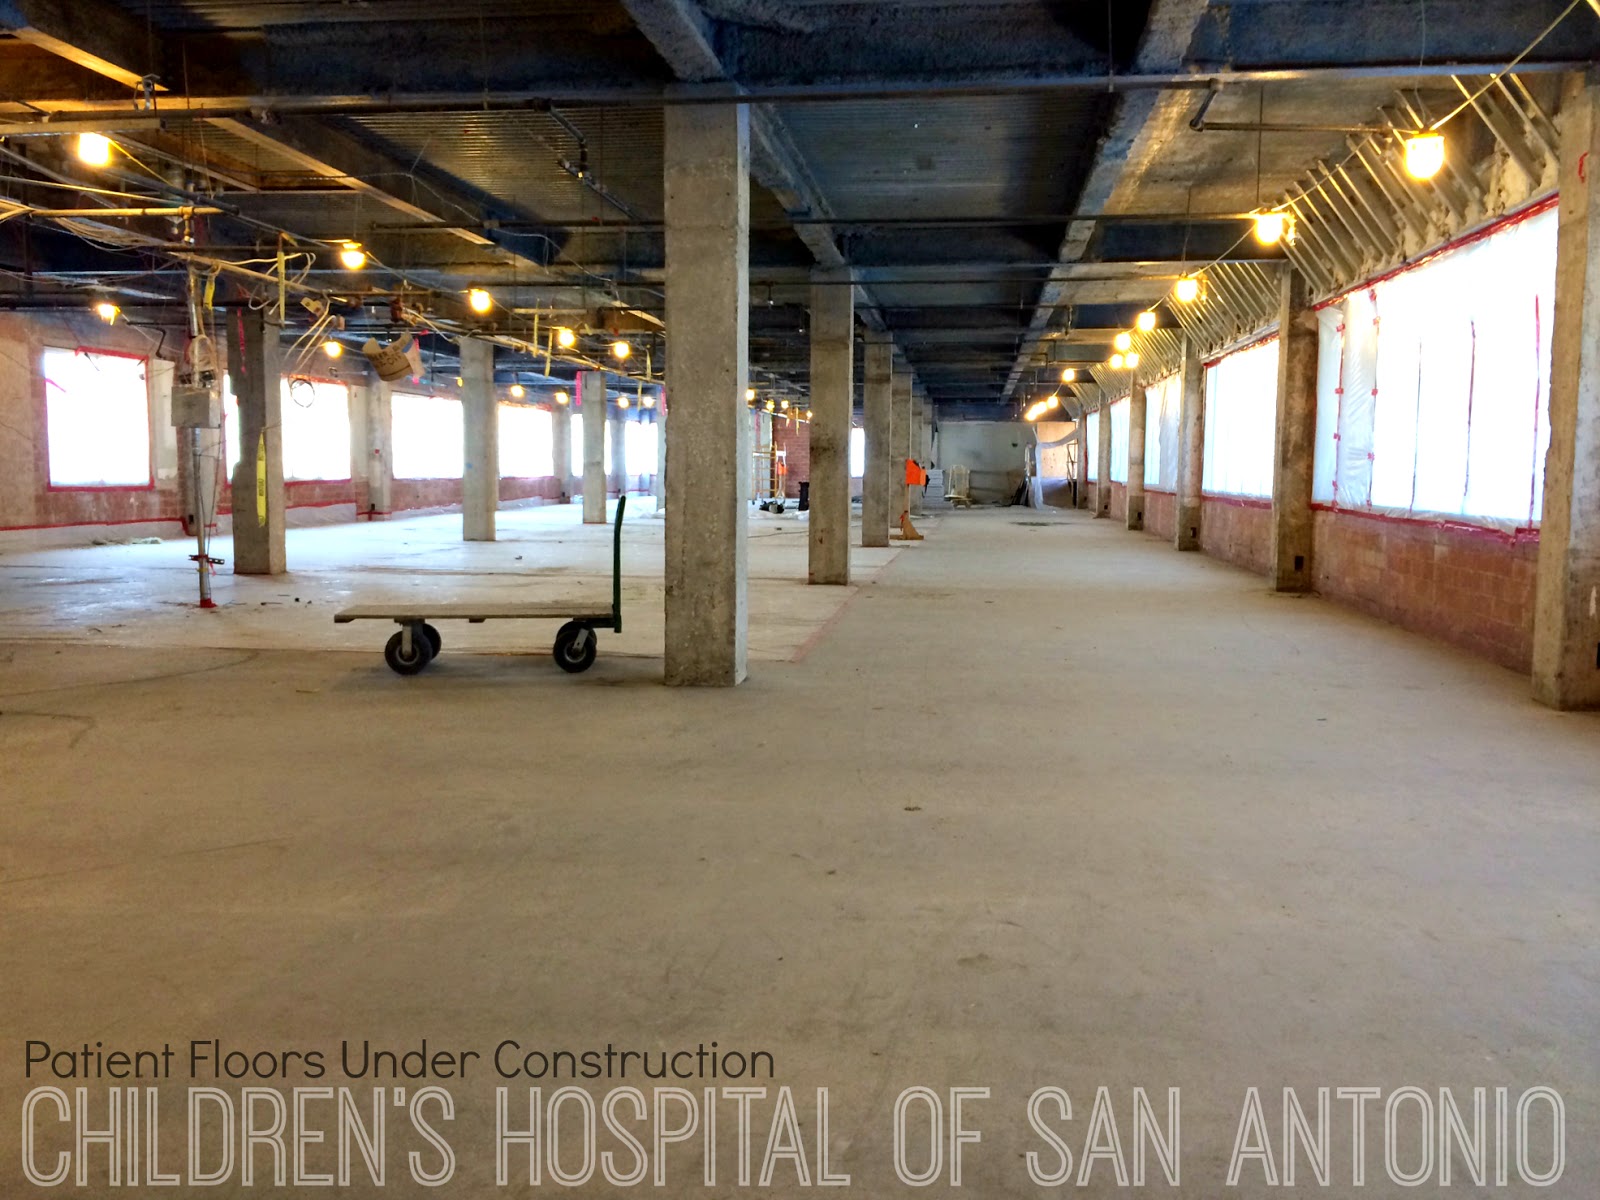 An update on the transformation of the Children's Hospital of San Antonio formerly Santa Rosa Hospital